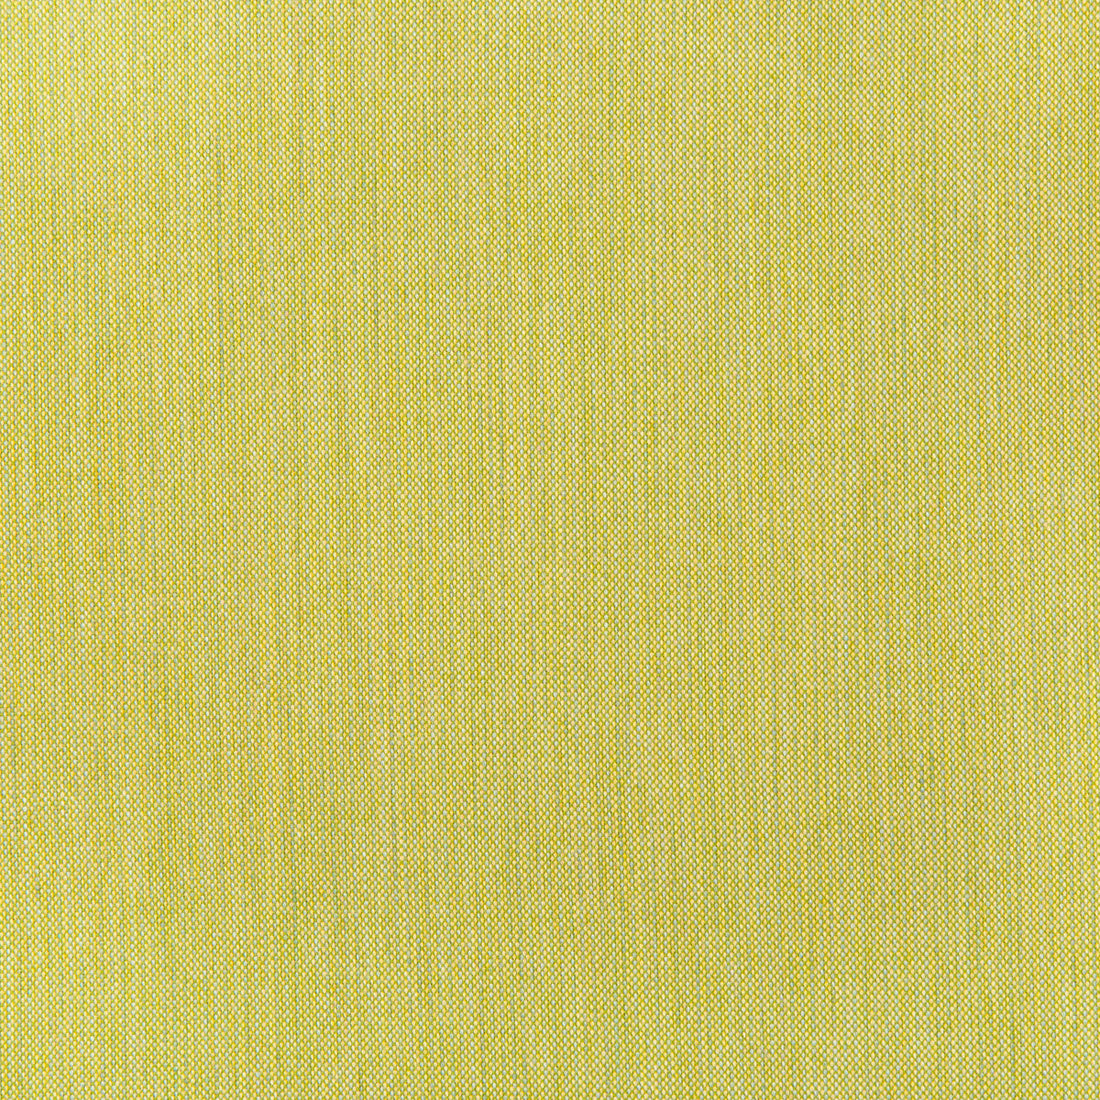 Kravet Basics fabric in 36820-23 color - pattern 36820.23.0 - by Kravet Basics in the Indoor / Outdoor collection